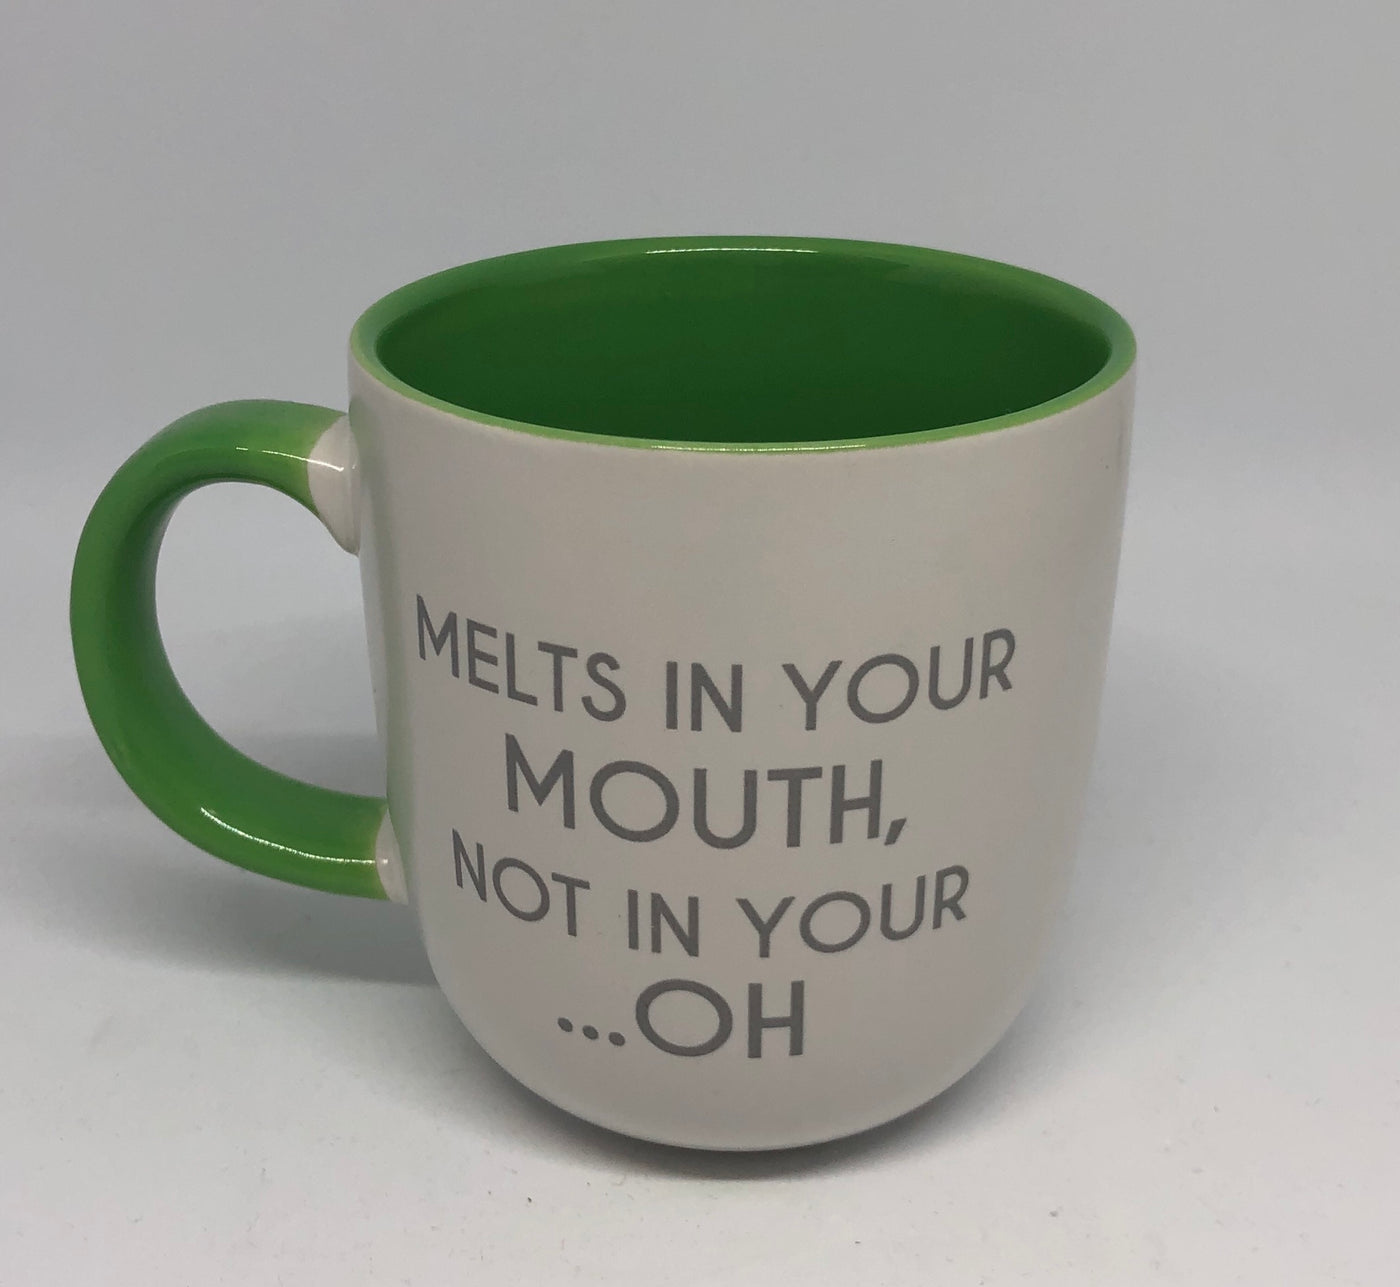 M&M's World Melts in Your Mouth Not in Your ...Oh Ceramic Coffee Mug New